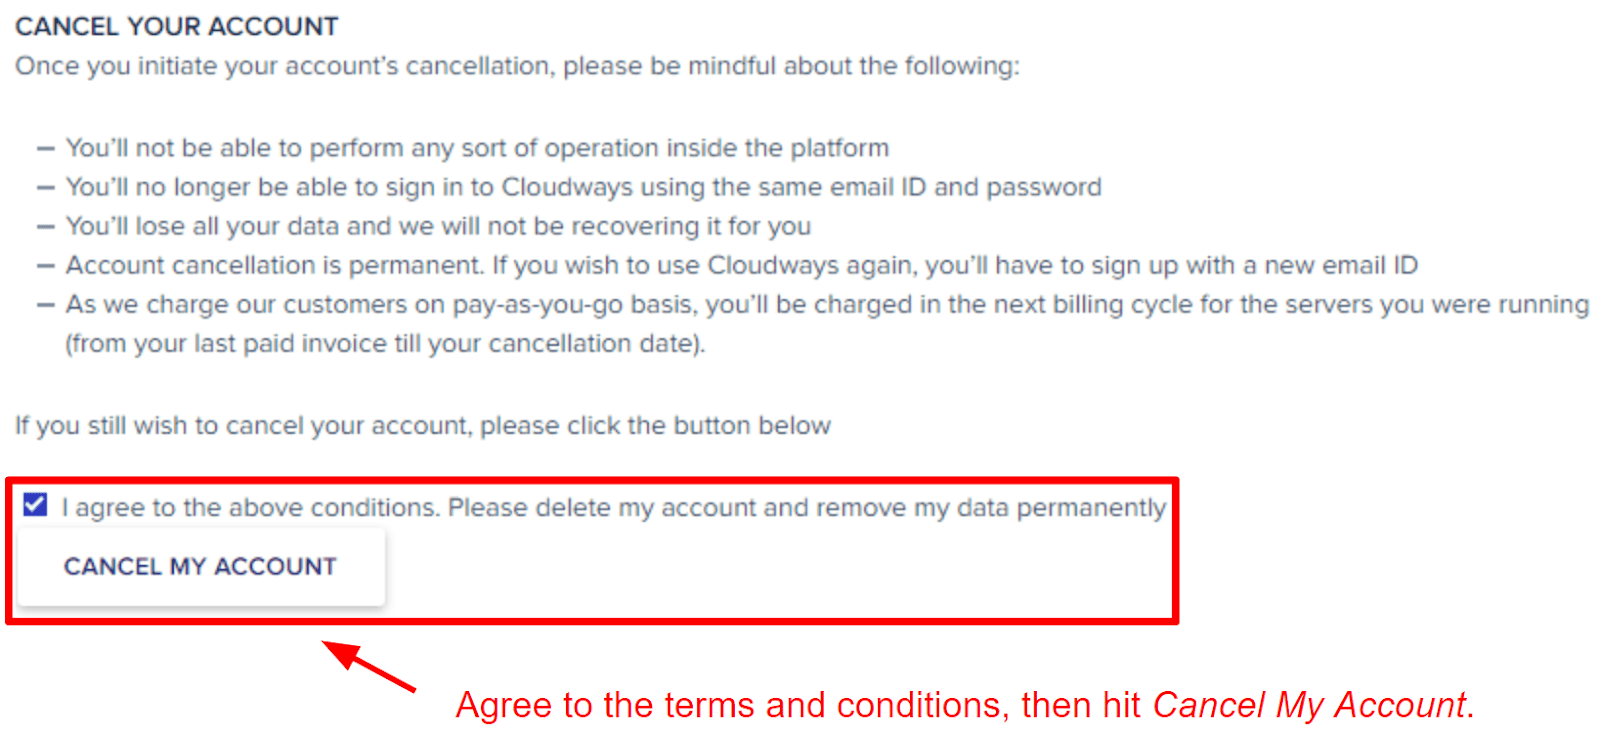 Cloudways cancellation terms and conditions